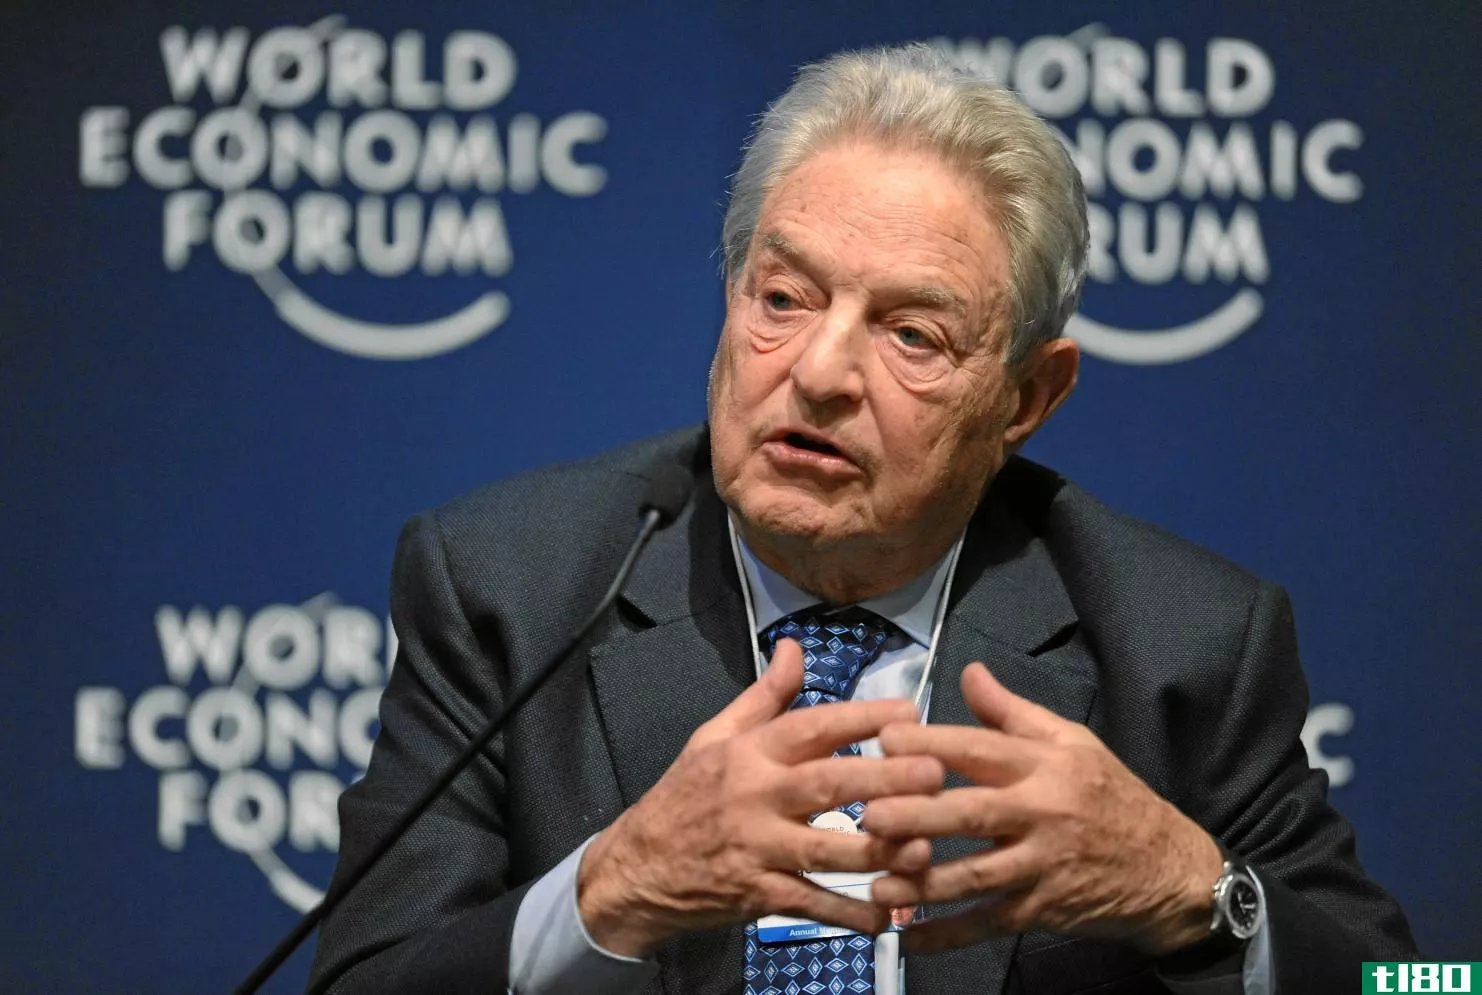 Used under a Creative Comm*** license at https://comm***.wikimedia.org/wiki/File:George_Soros_-_World_Economic_Forum_Annual_Meeting_2011.jpg